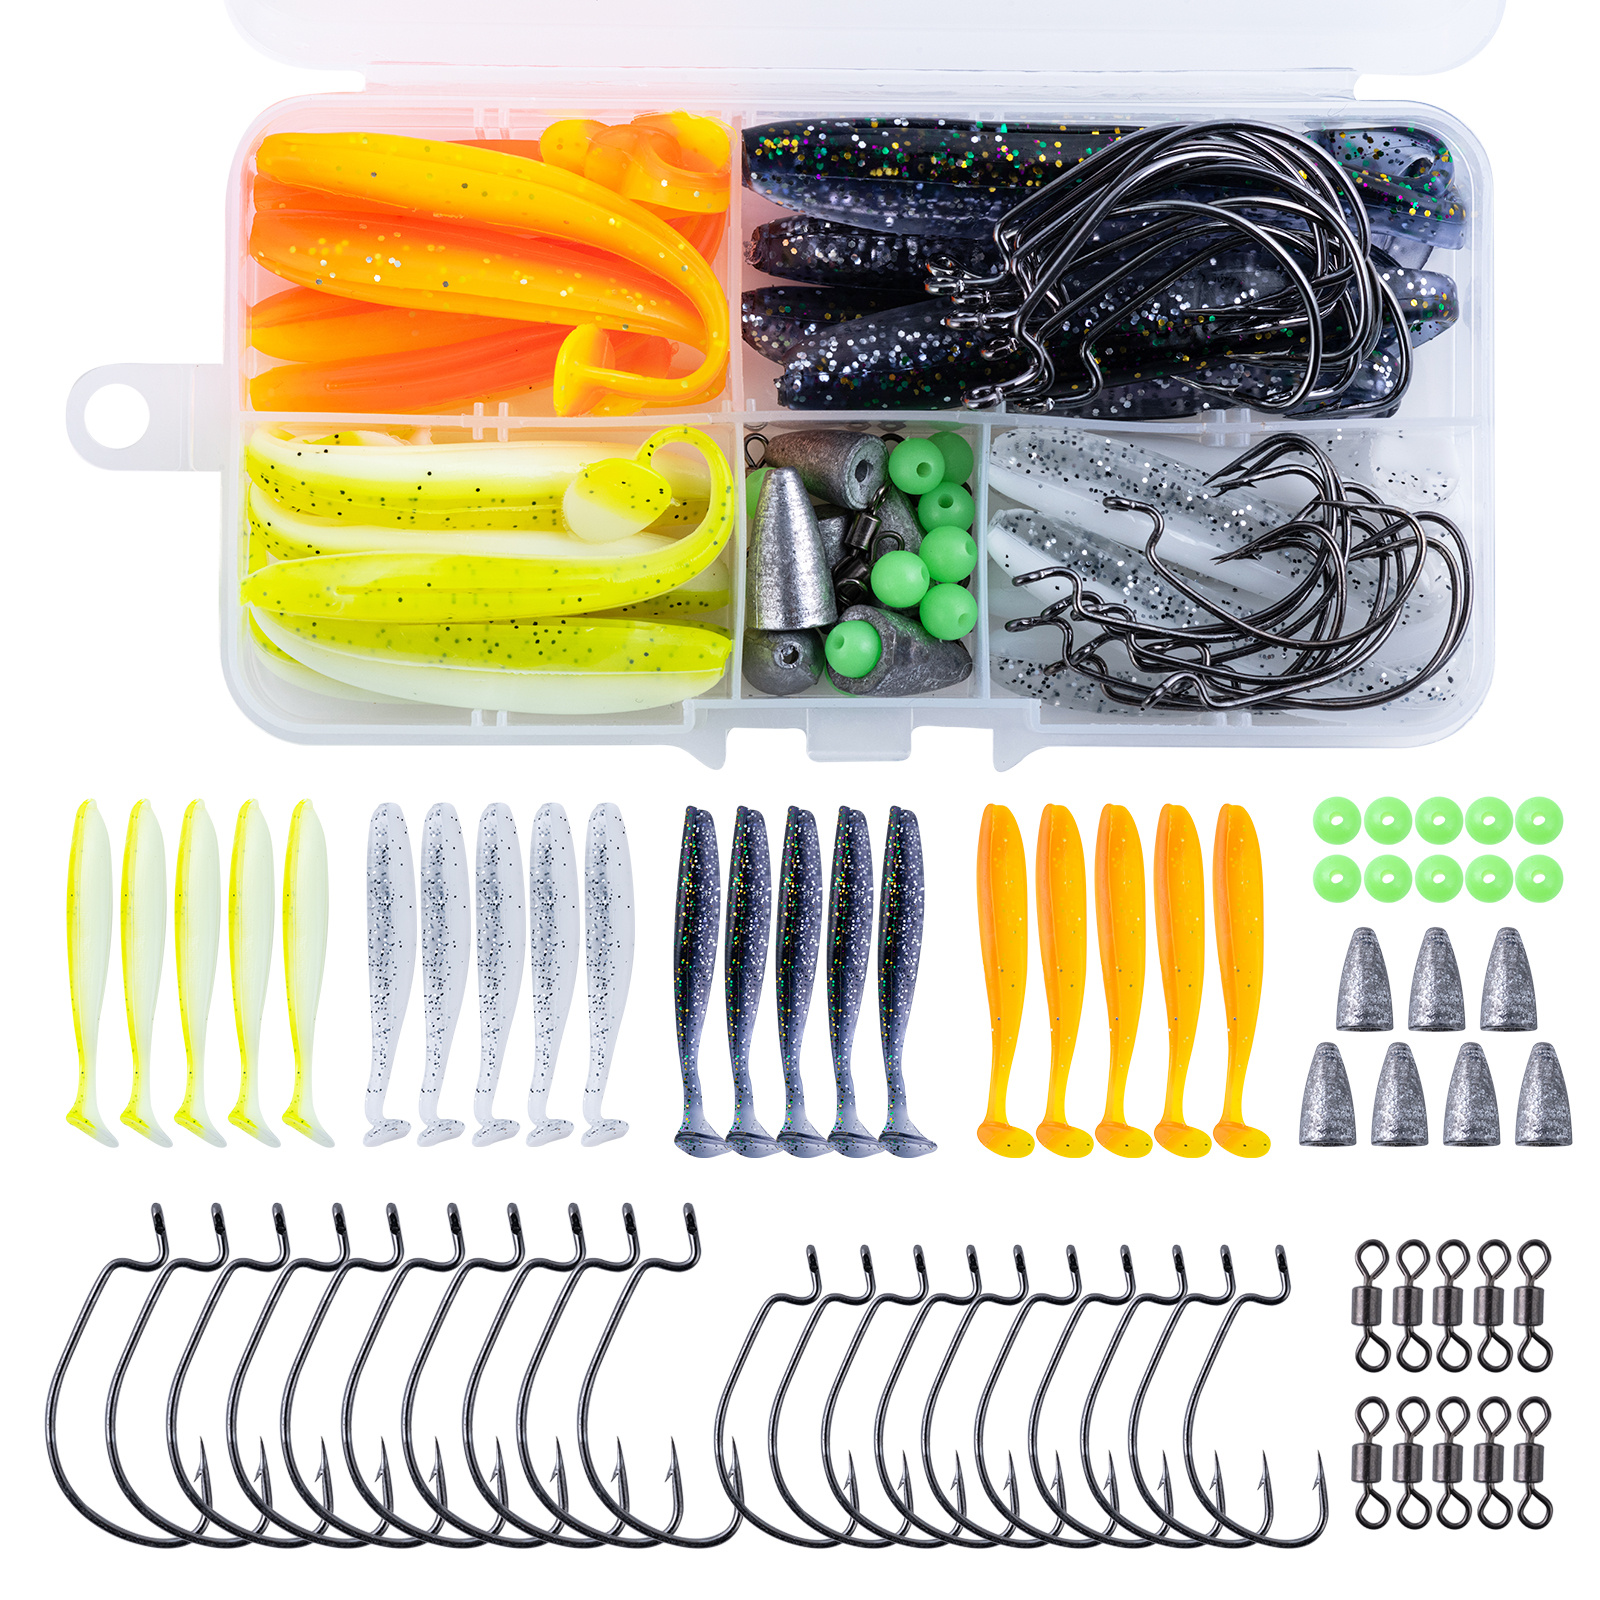 68 Piece Texas Rig Fishing Kit Skirted Soft Lures Screw Pins